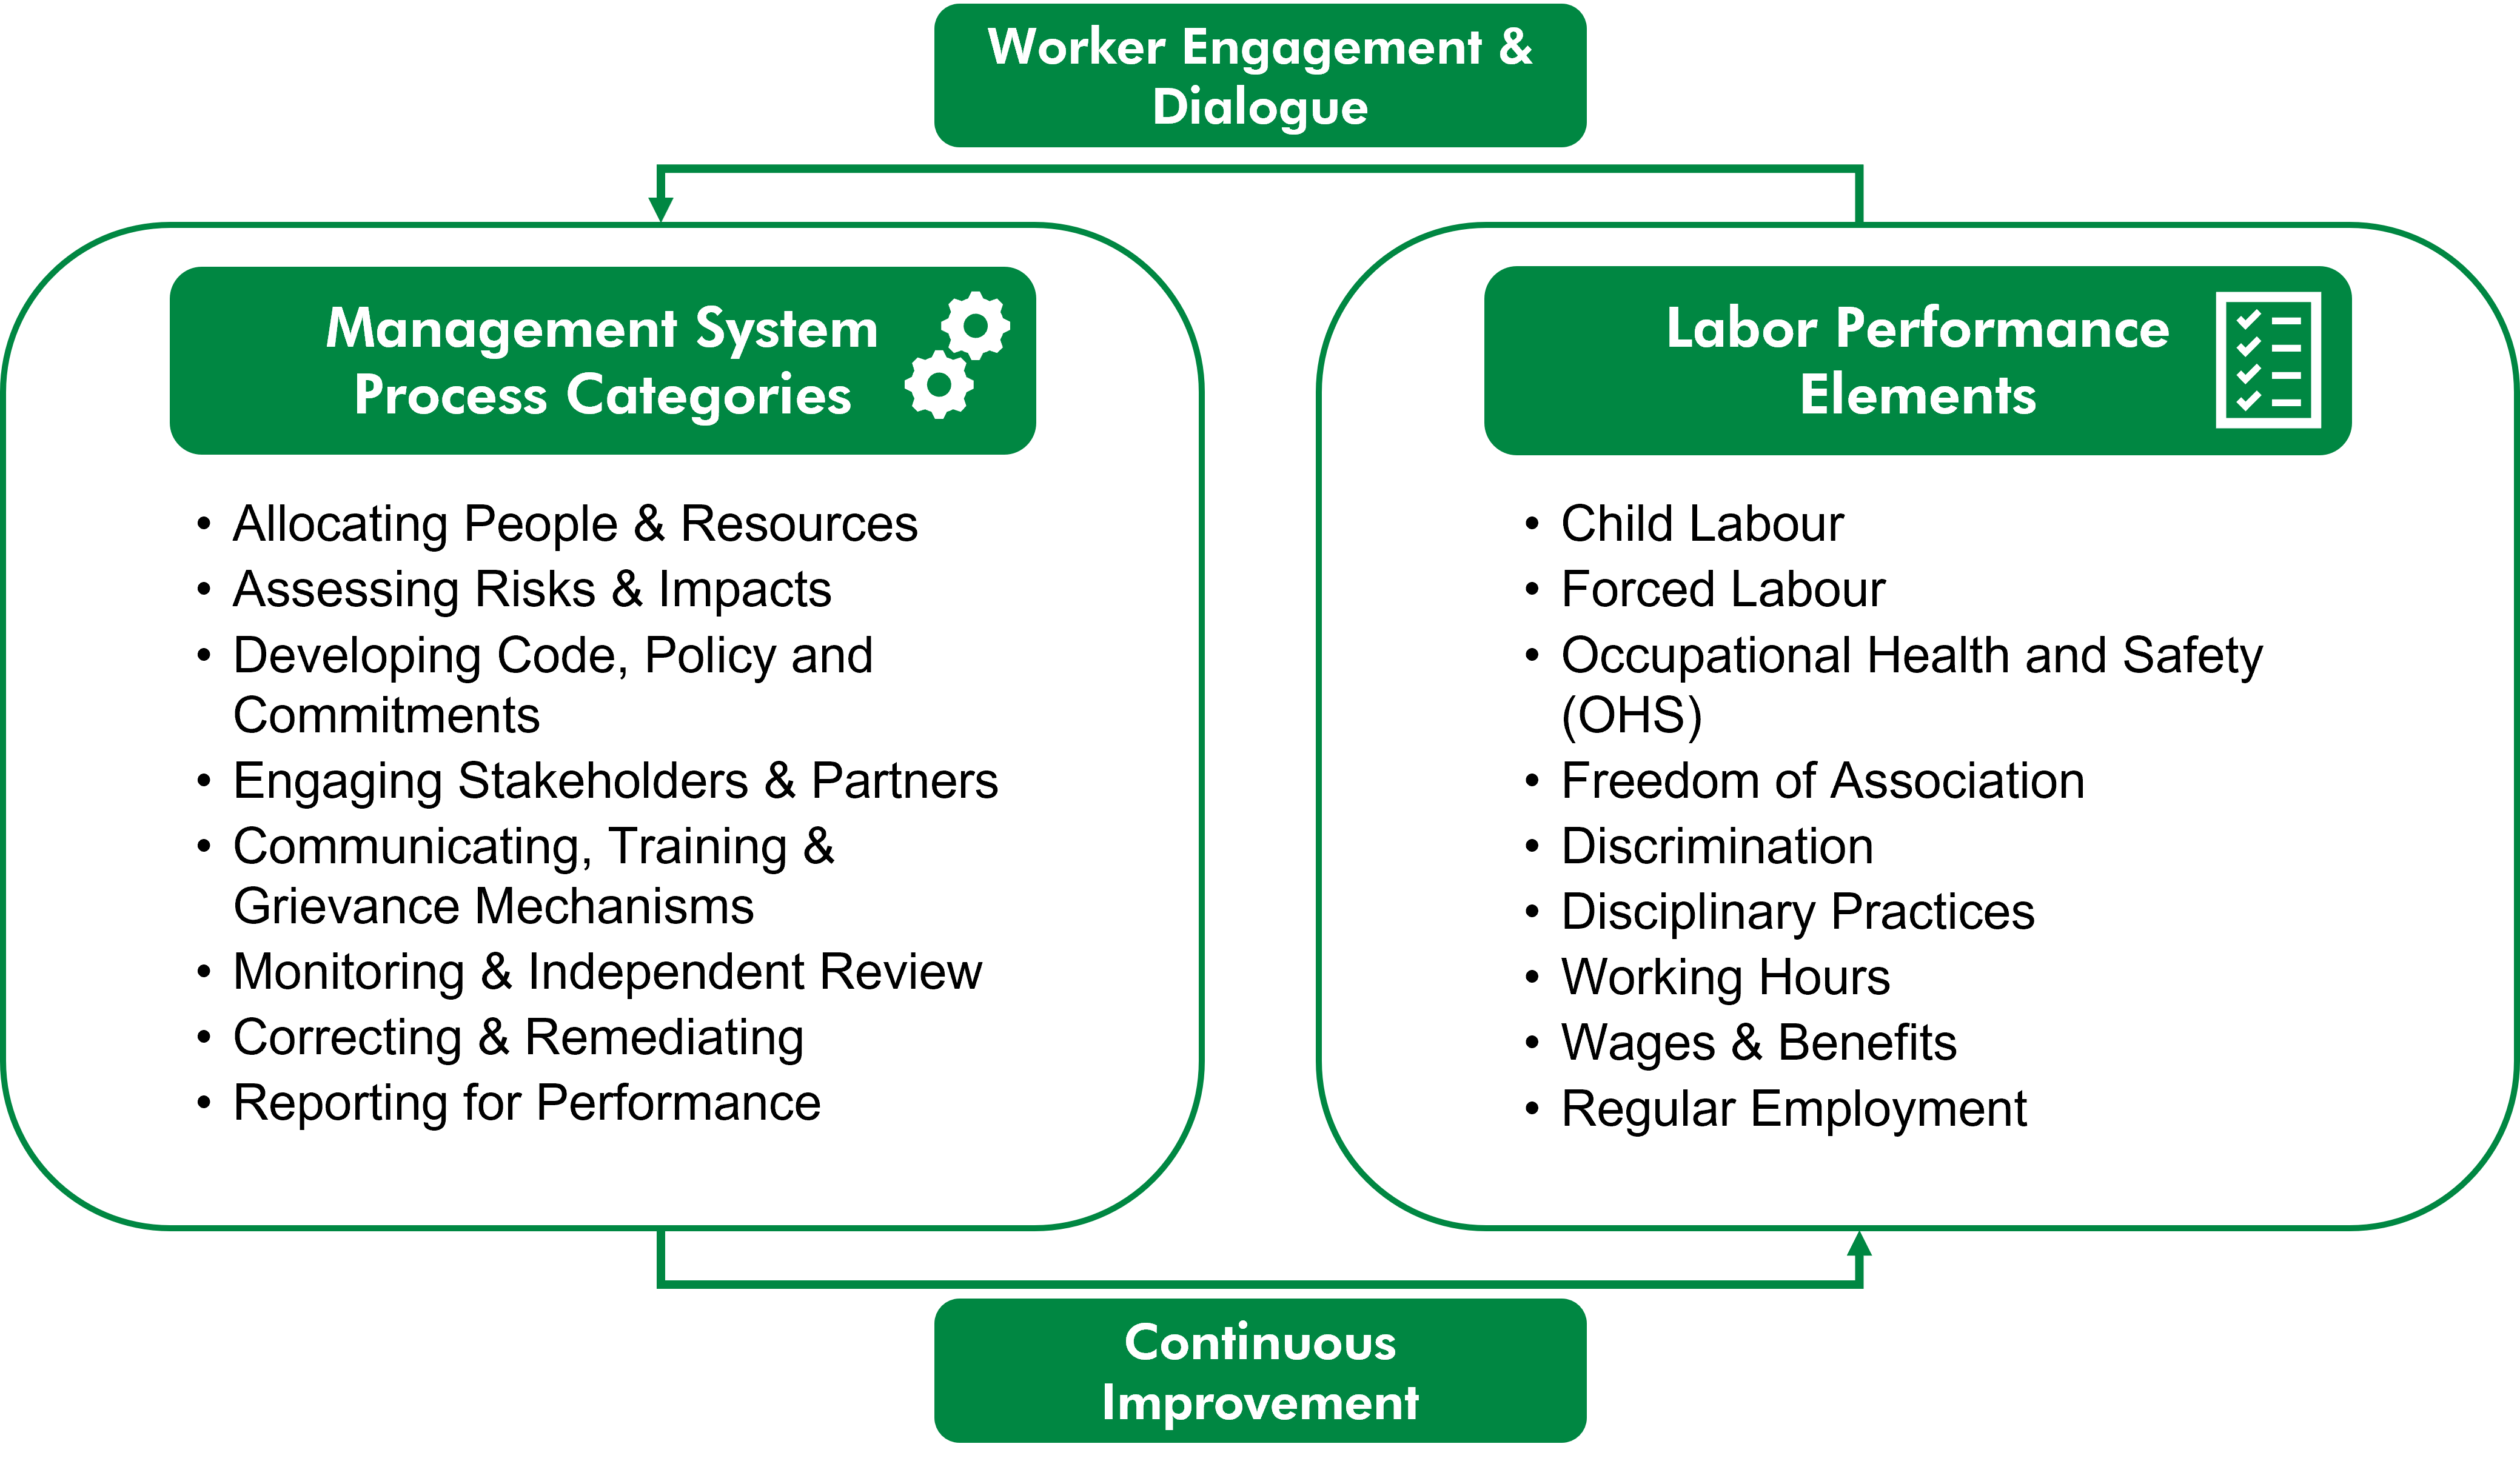 Management System 
Process Categories: 
Allocating People & Resources,
Assessing Risks & Impacts,
Developing Code, Policy and Commitments,
Engaging Stakeholders & Partners,
Communicating, Training & Grievance Mechanisms,
Monitoring & Independent Review,
Correcting & Remediating,
Reporting for Performance.
Labor Performance 
Elements: 
Child Labour, 
Forced Labour, 
Occupational Health and Safety (OHS), 
Freedom of Association, 
Discrimination, 
Disciplinary Practices, 
Working Hours, 
Wages & Benefits, 
Regular Employment .
These two concepts are depicted in a cycle , with the additional concepts of Worker engagement & Dialogue and continual improvement connecting them.